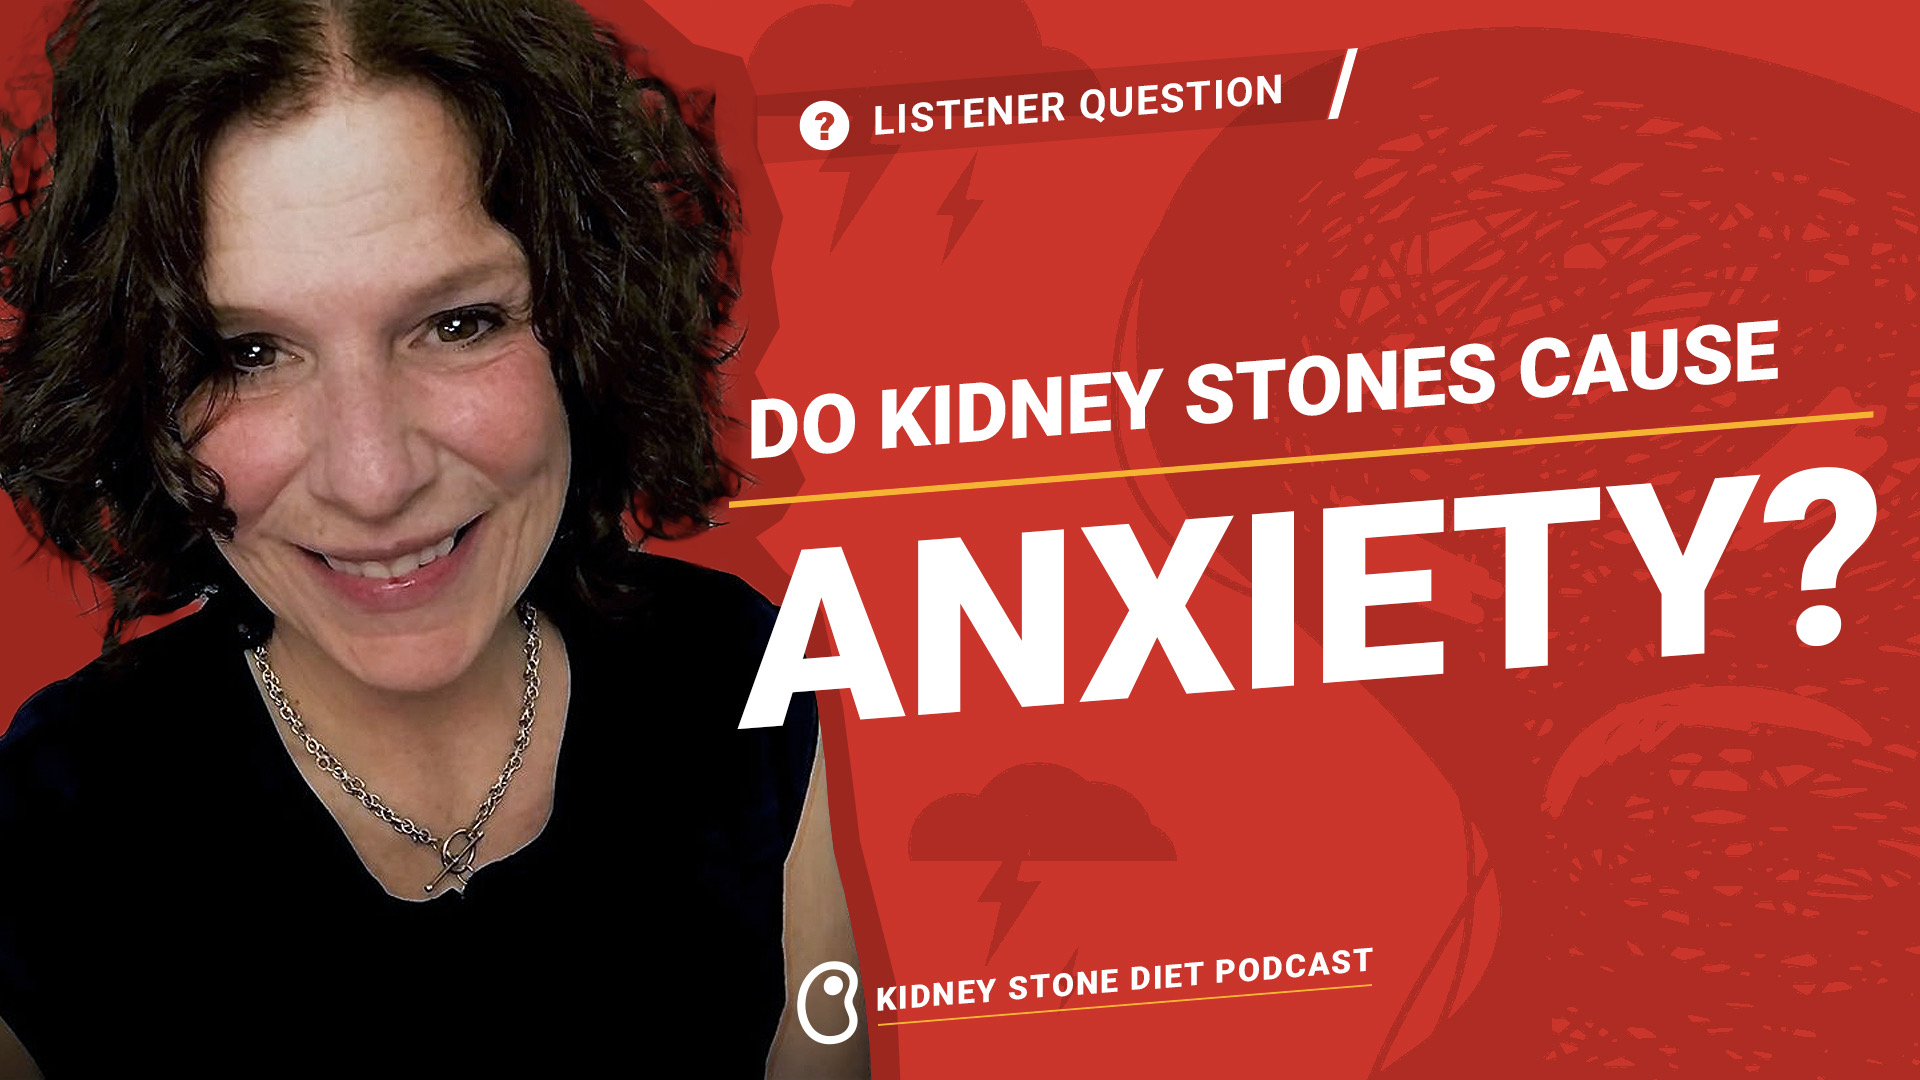 Do kidney stones cause anxiety?